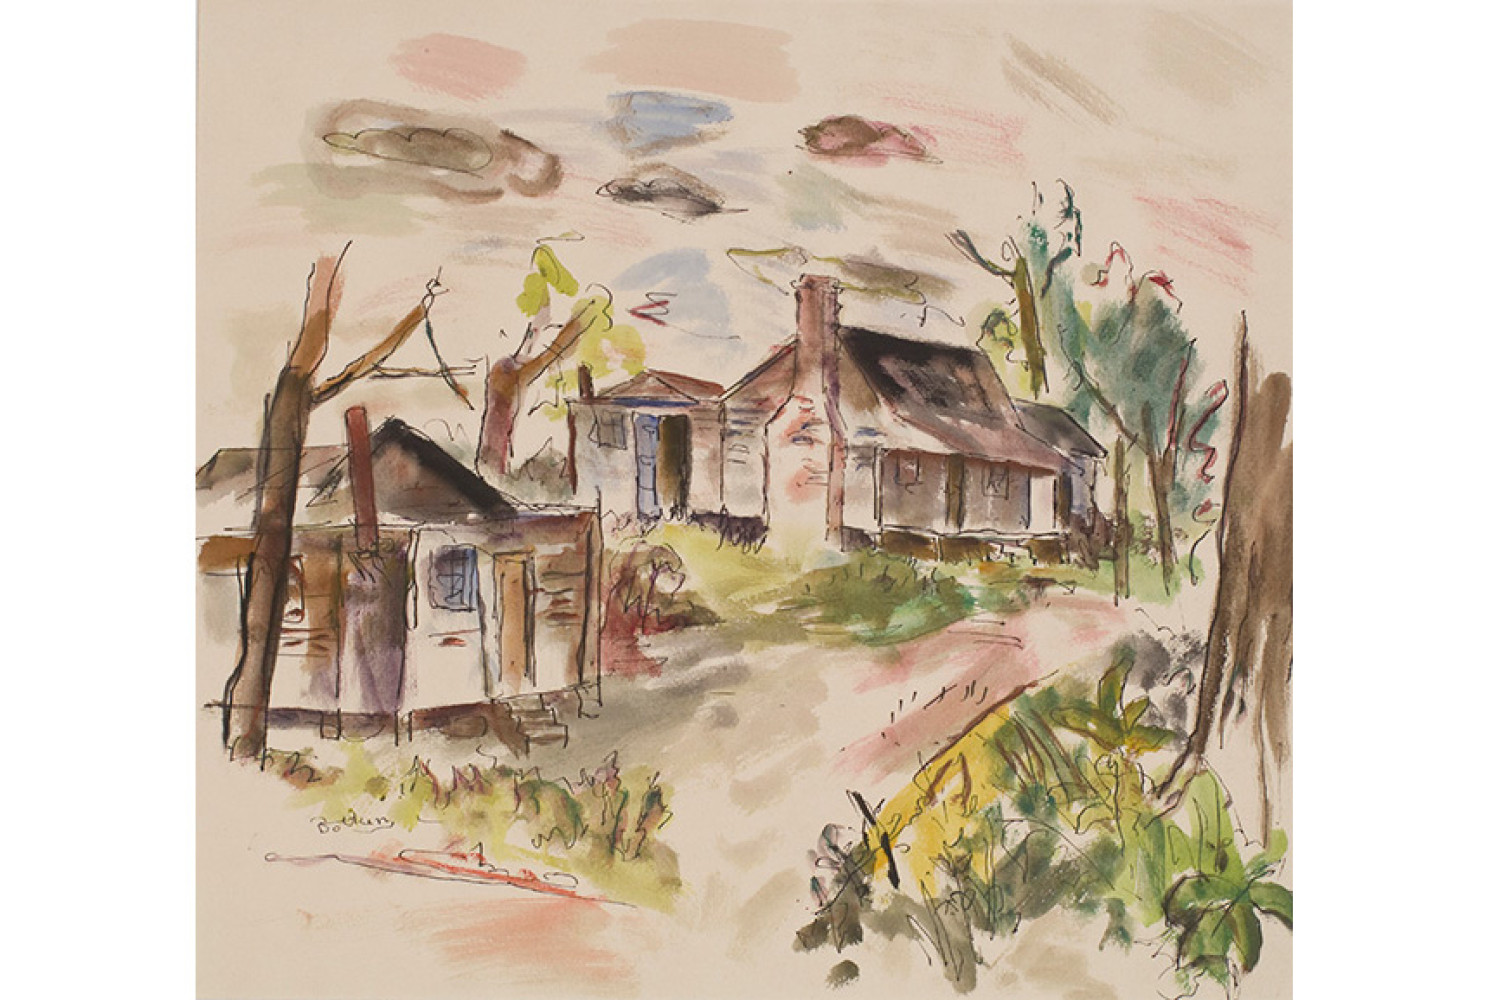 Porgy and Bess with George, Near Folly Island, 1934, by Henry Botkin (American, 1896-1983); watercolor and ink on paper; 16 1/2 x 19 3/8 inches; Museum purchase; 1988.011.0002